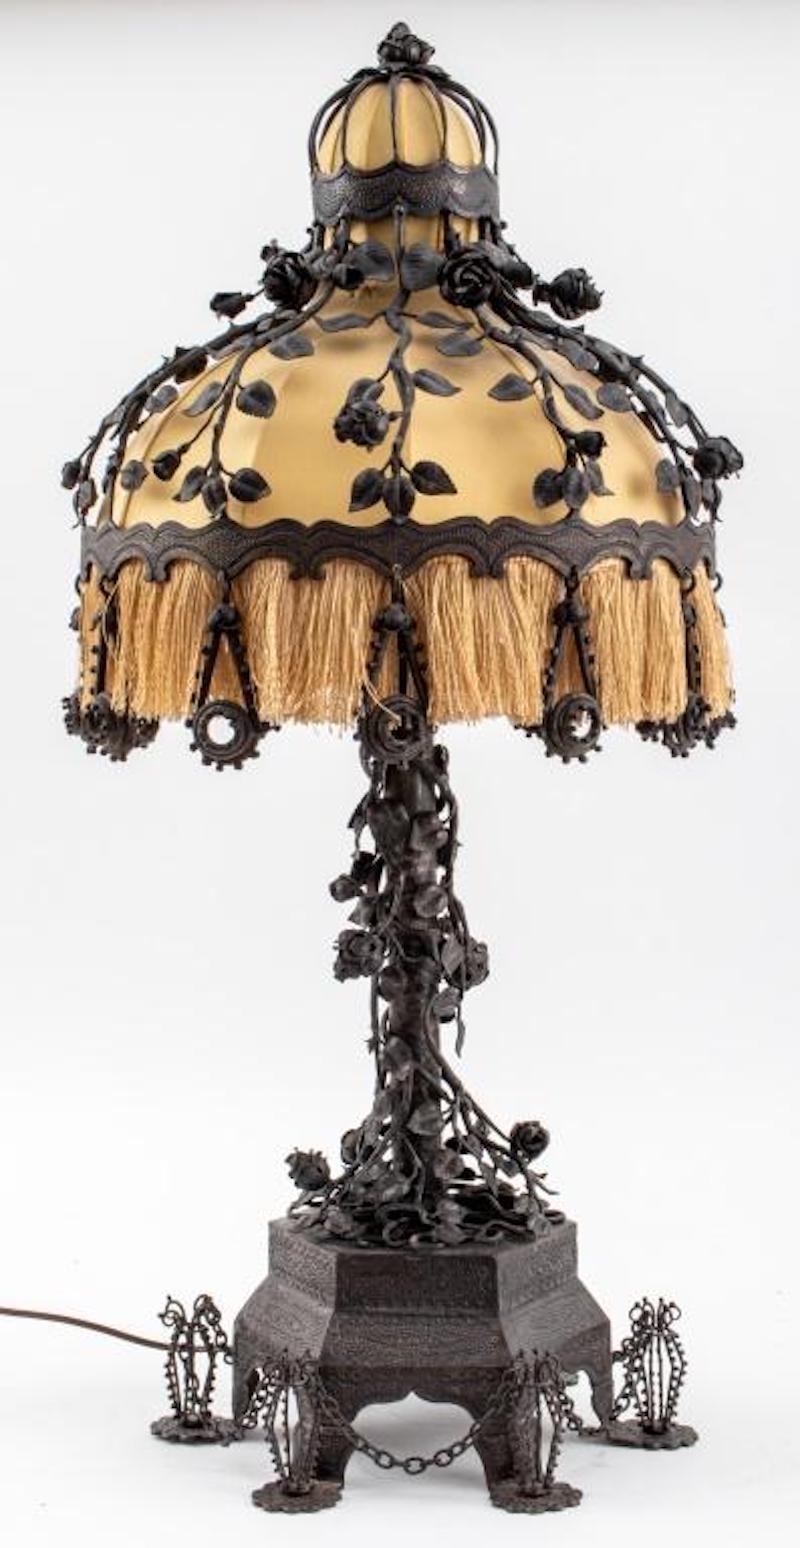 Beautiful craftsmanship bronze / wrought iron table lamp with rose flowers and thorns in high relief to the base and shade. The lamp features a bell shaped shade of beige fabric and fringe trim resting on an hexagonal base with geometric decoration